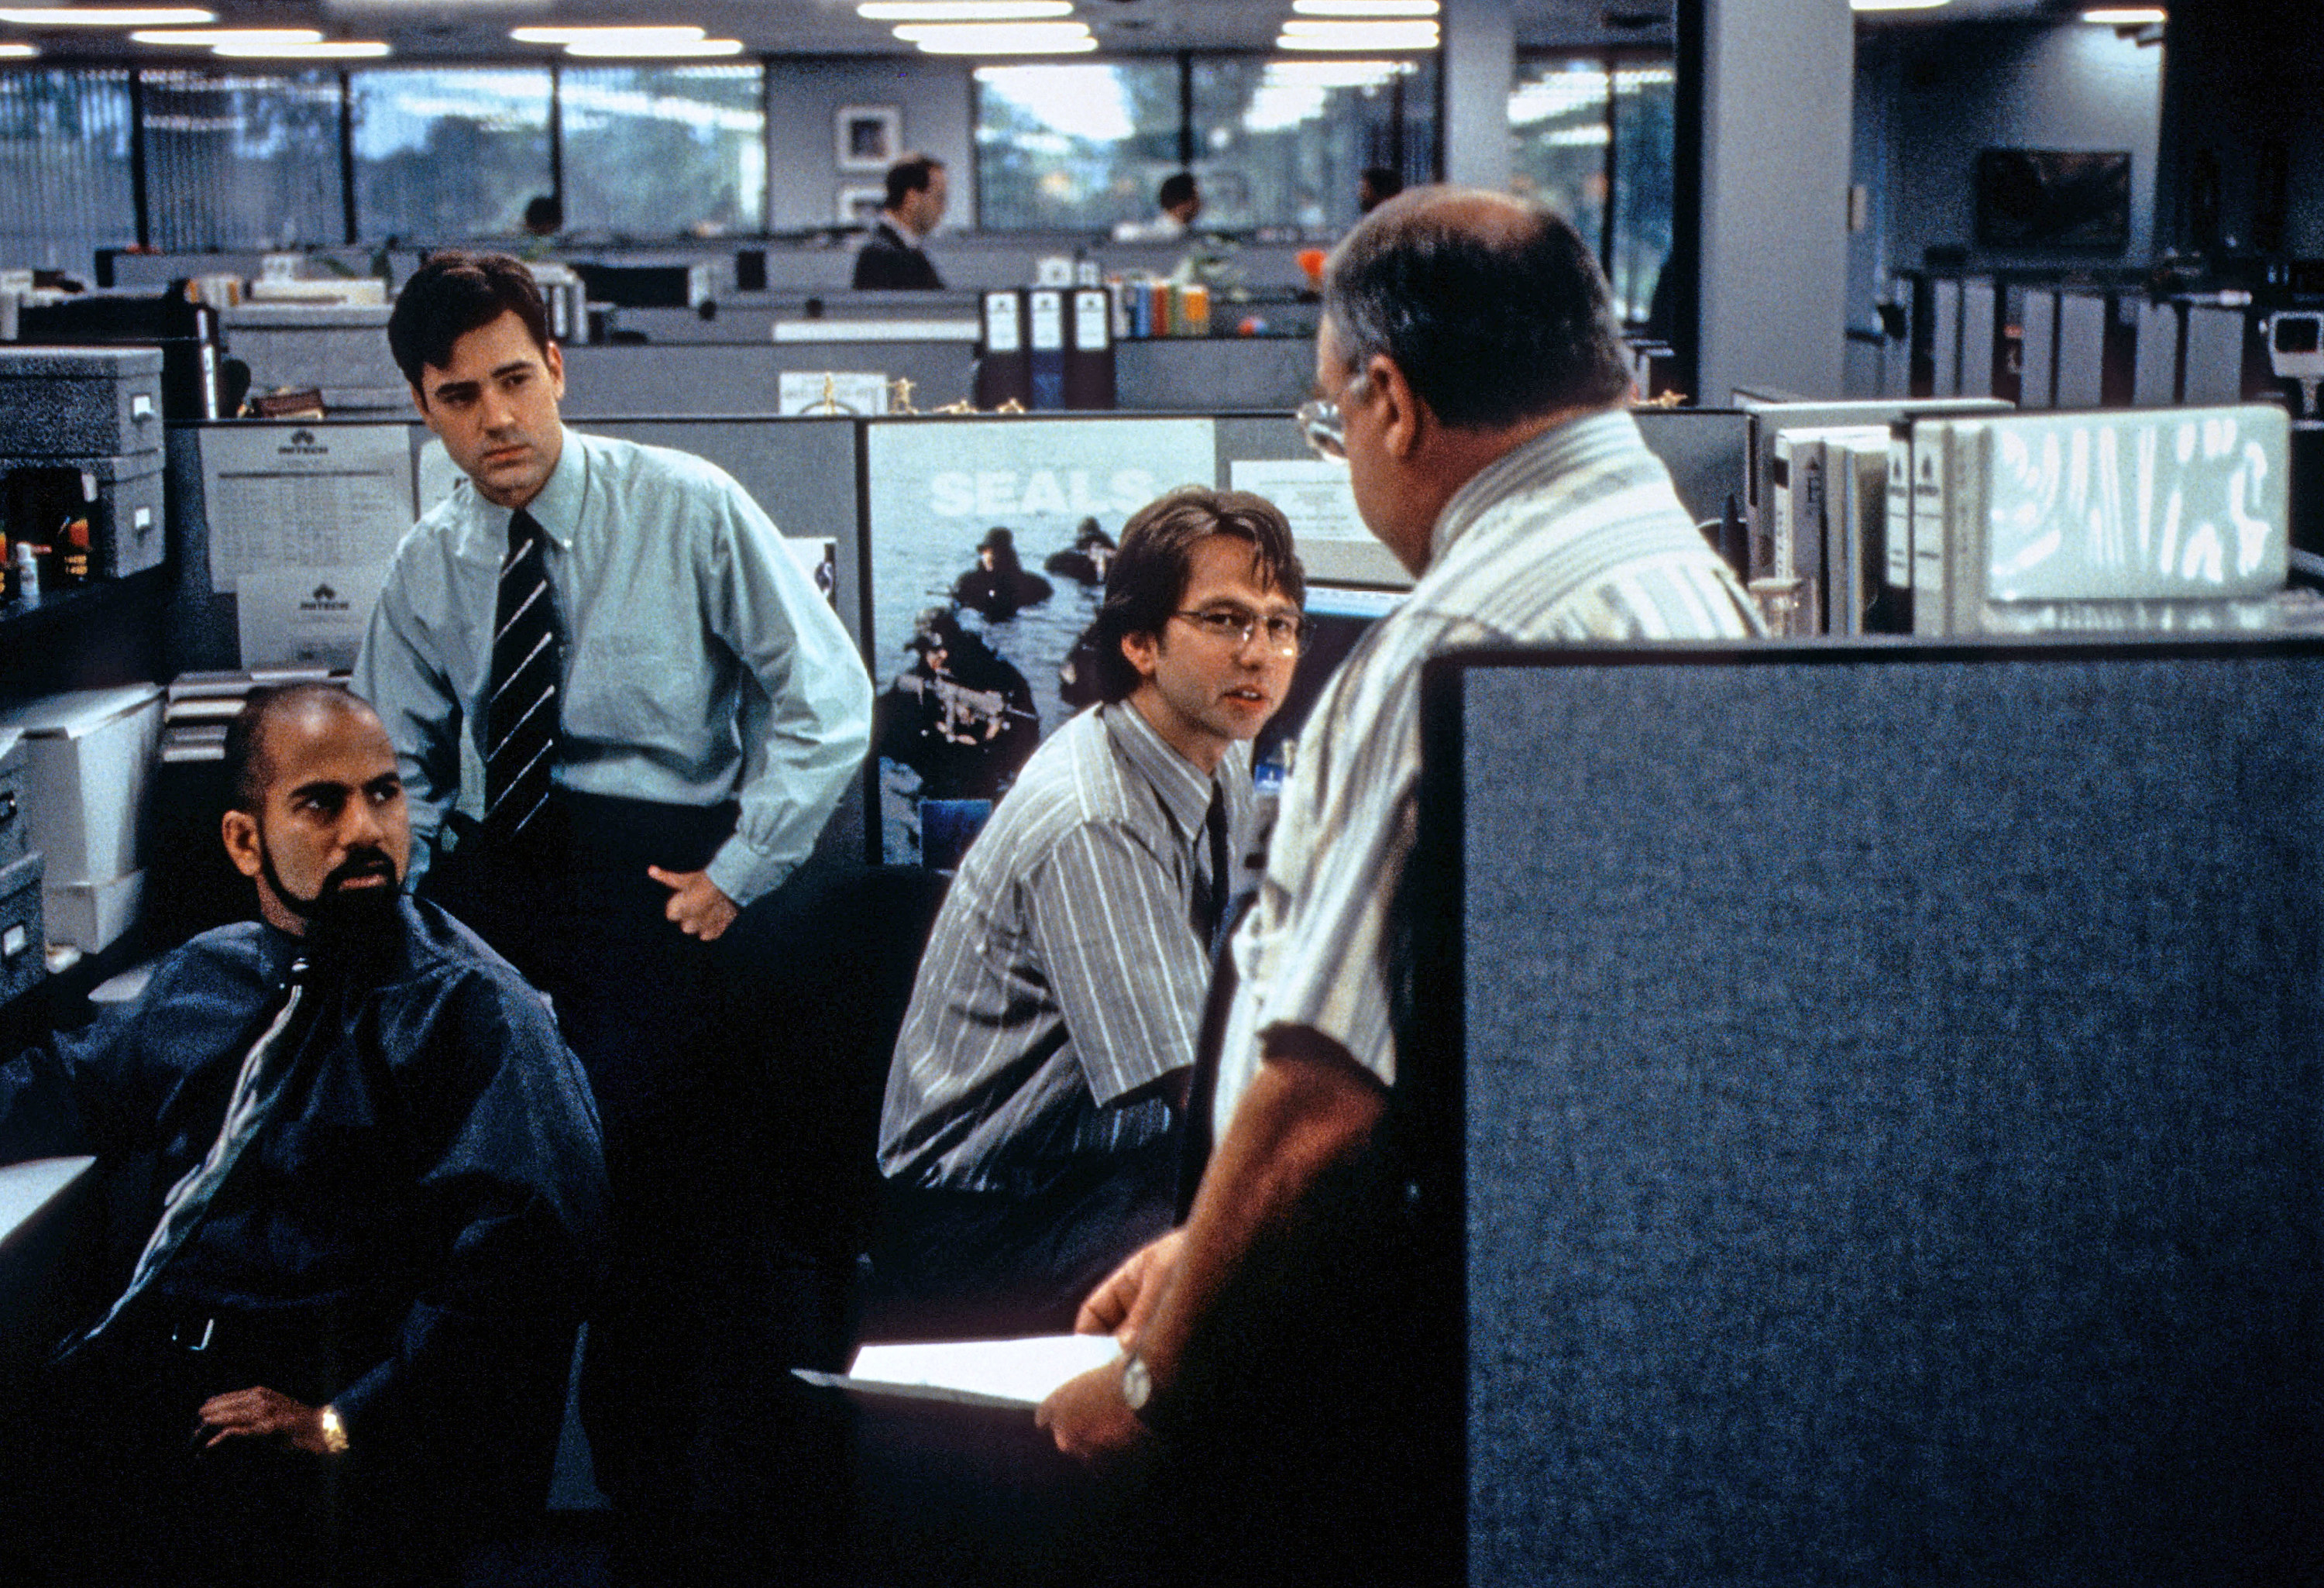 A group of workers standing by an office cubicle